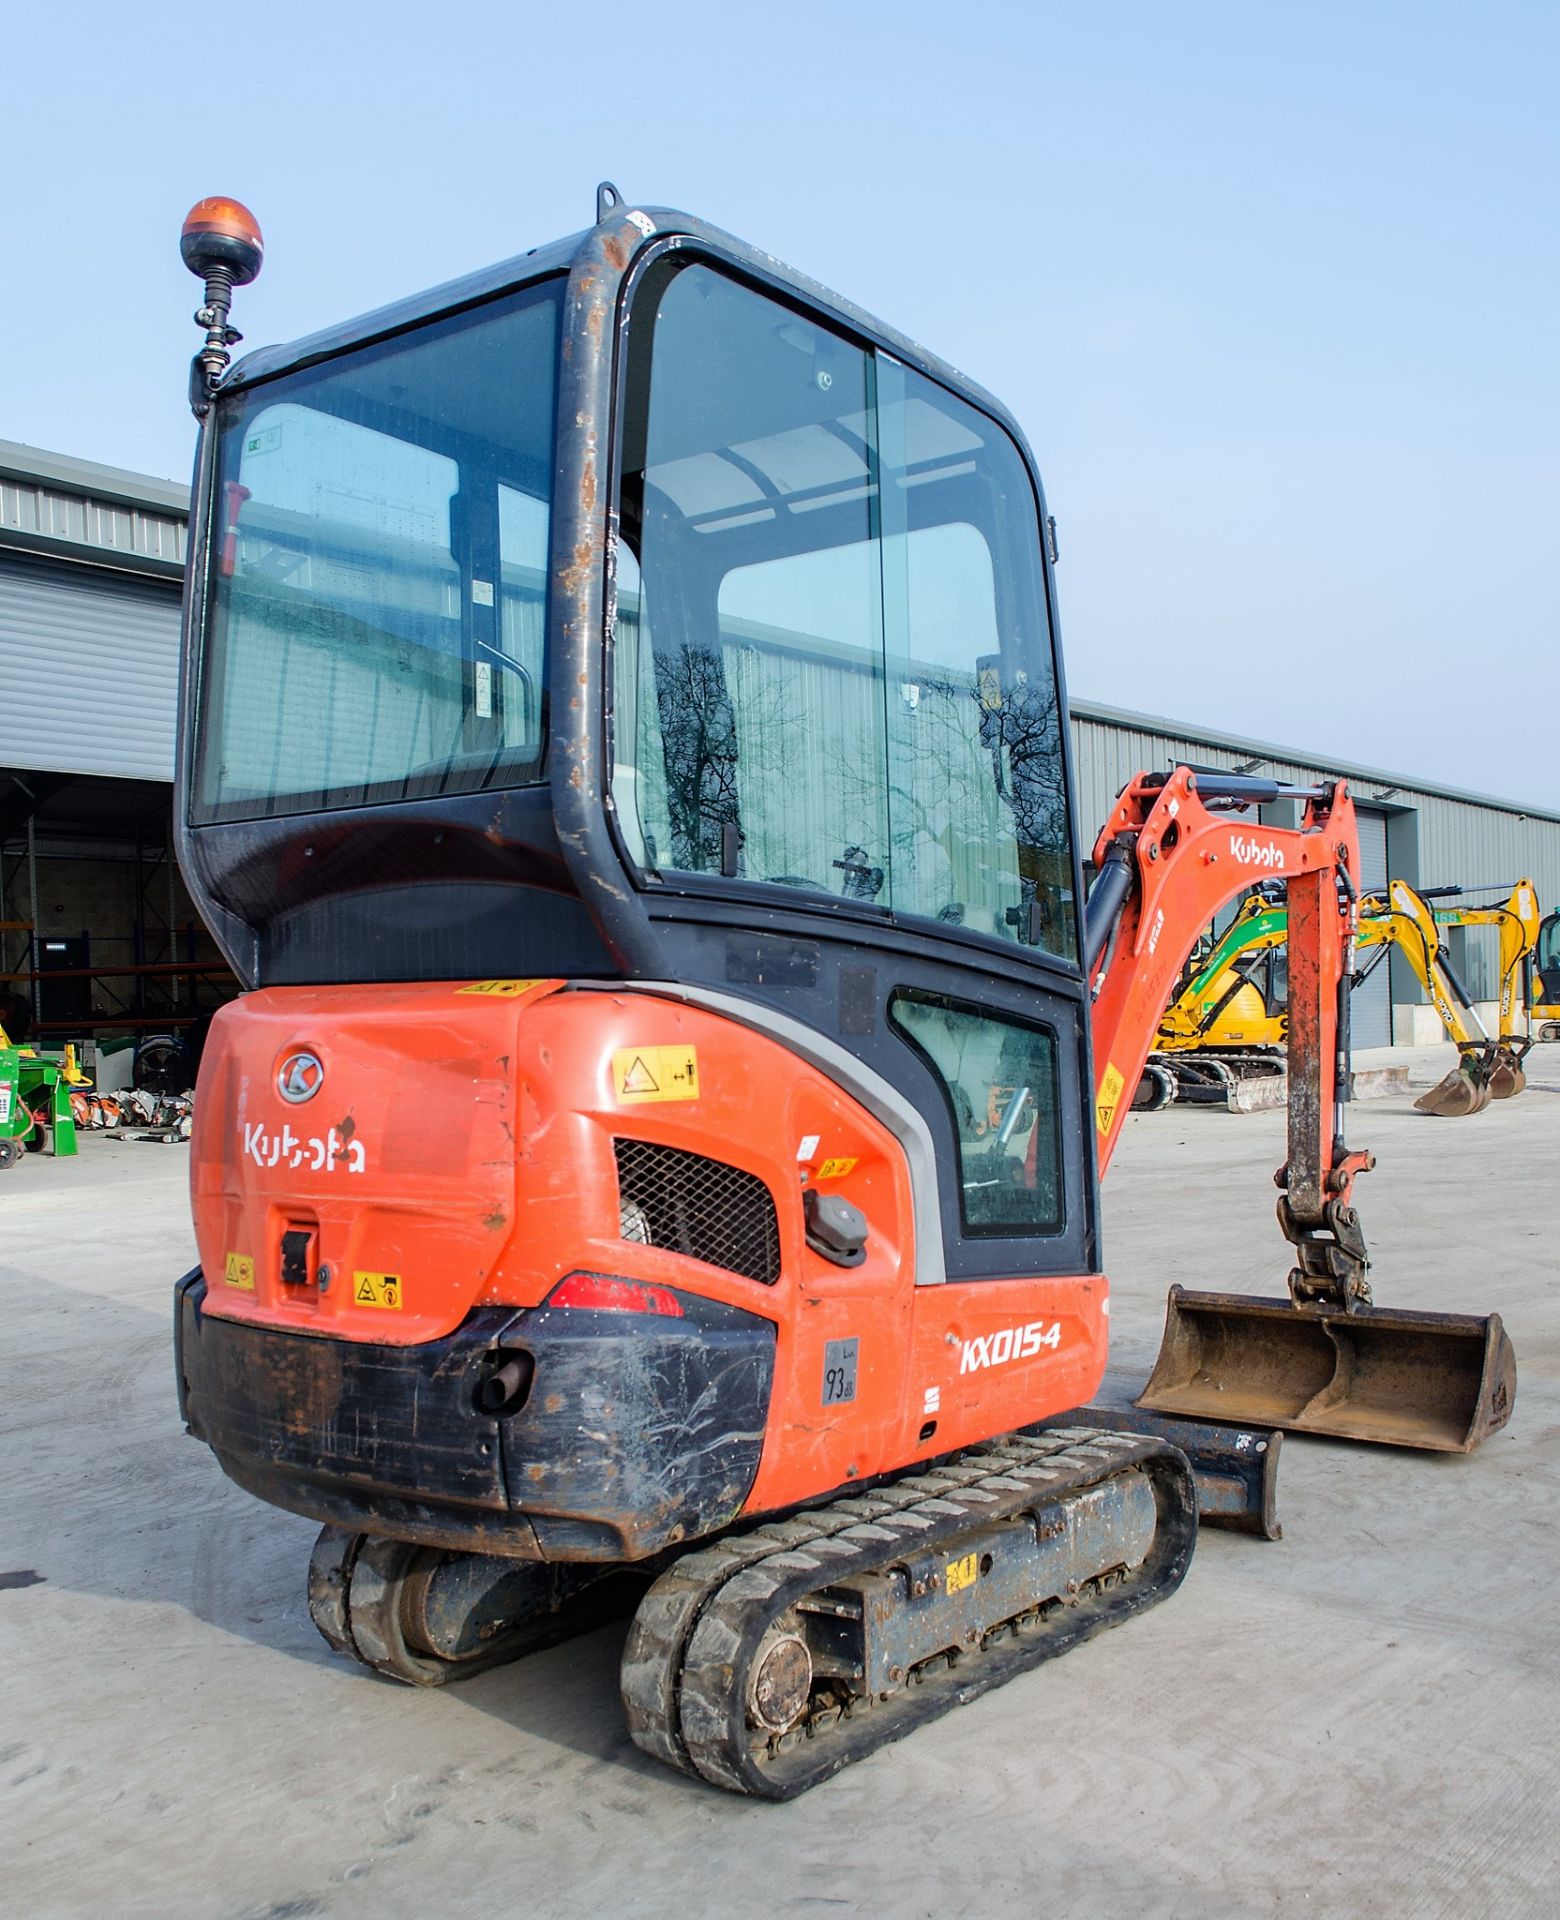 Kubota KX015-4 1.5 tonne rubber tracked excavator Year: 2014 S/N: 58181 Recorded Hours: 1616 - Image 3 of 21